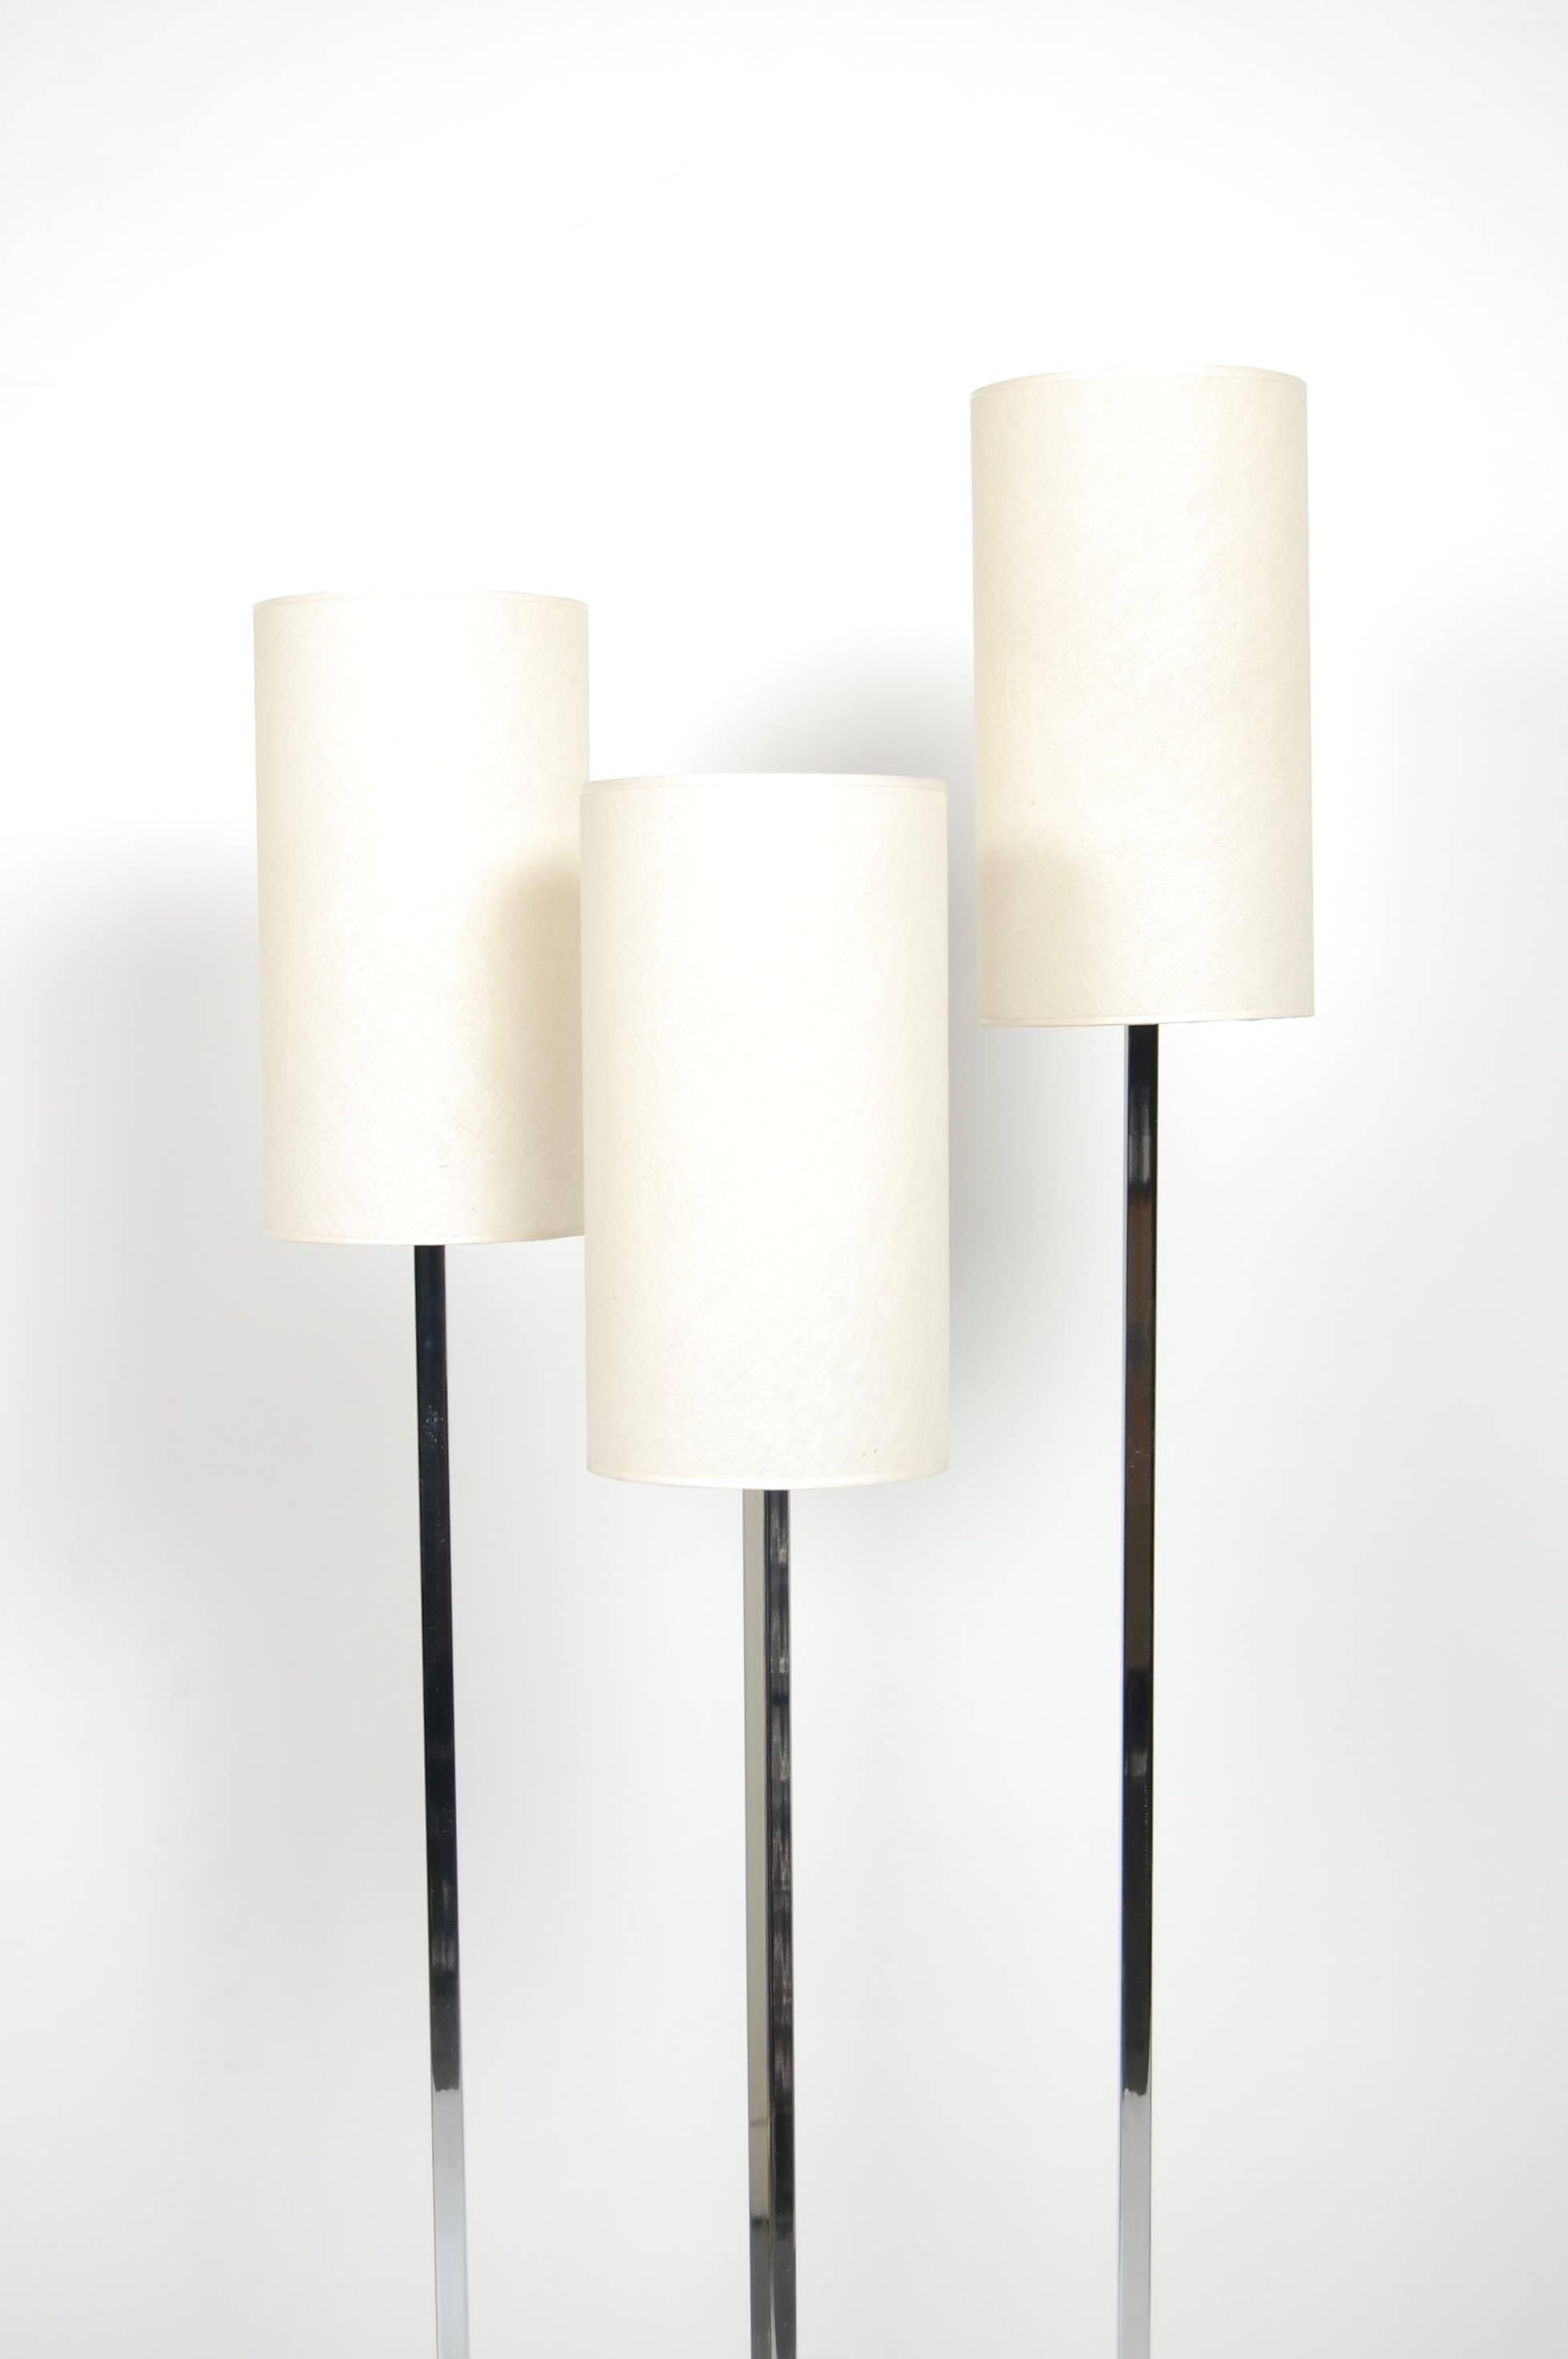 1970s three shade floor lamp with asymmetrical black cast iron base. The original off white shades are cylindrical and in excellent vintage condition. The upright light stems are chromed and the light is operated via a foot switch.